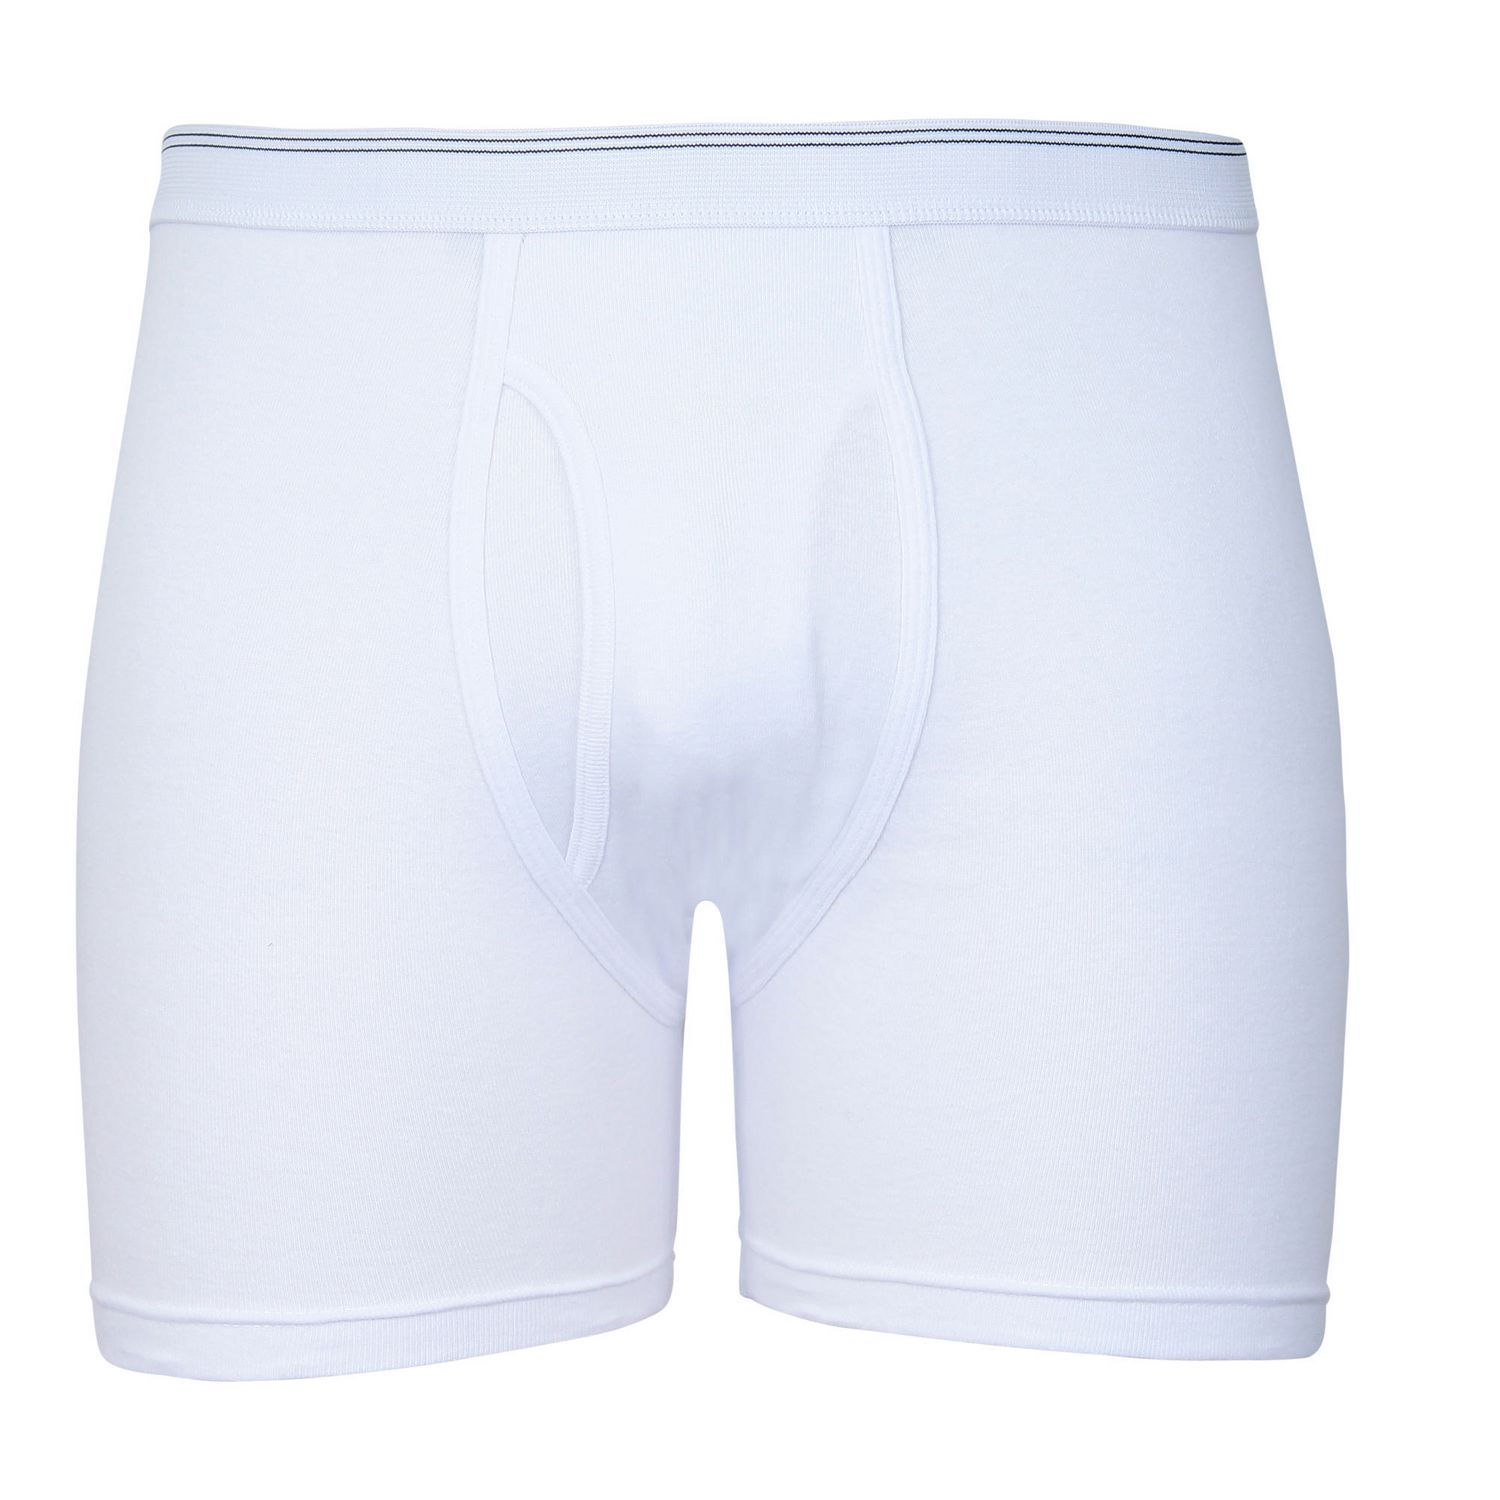 George Men's Two-Pack Boxer Brief | Walmart Canada